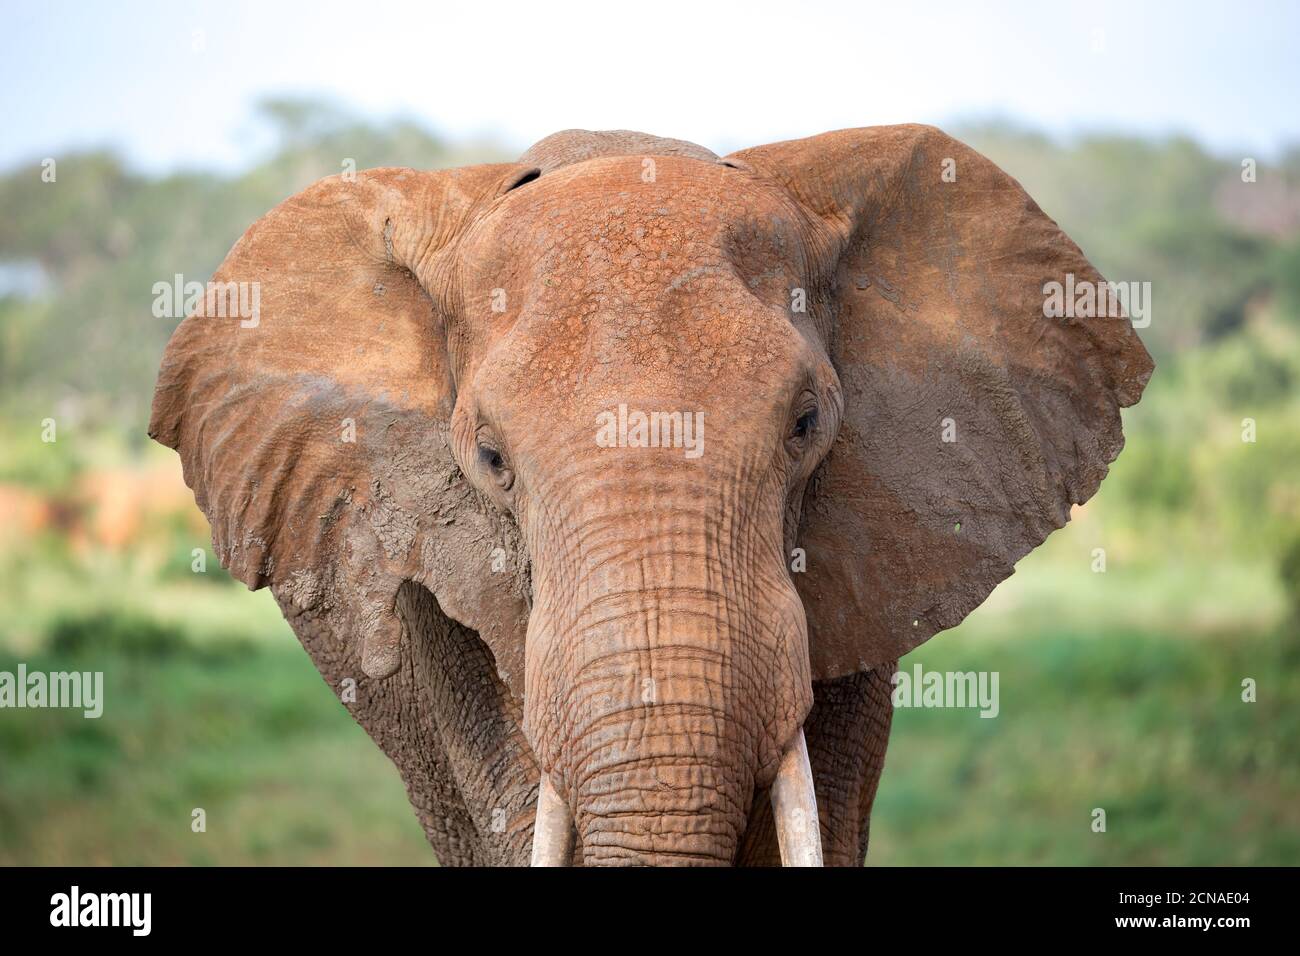 The face of a red elephant taken up close Stock Photo